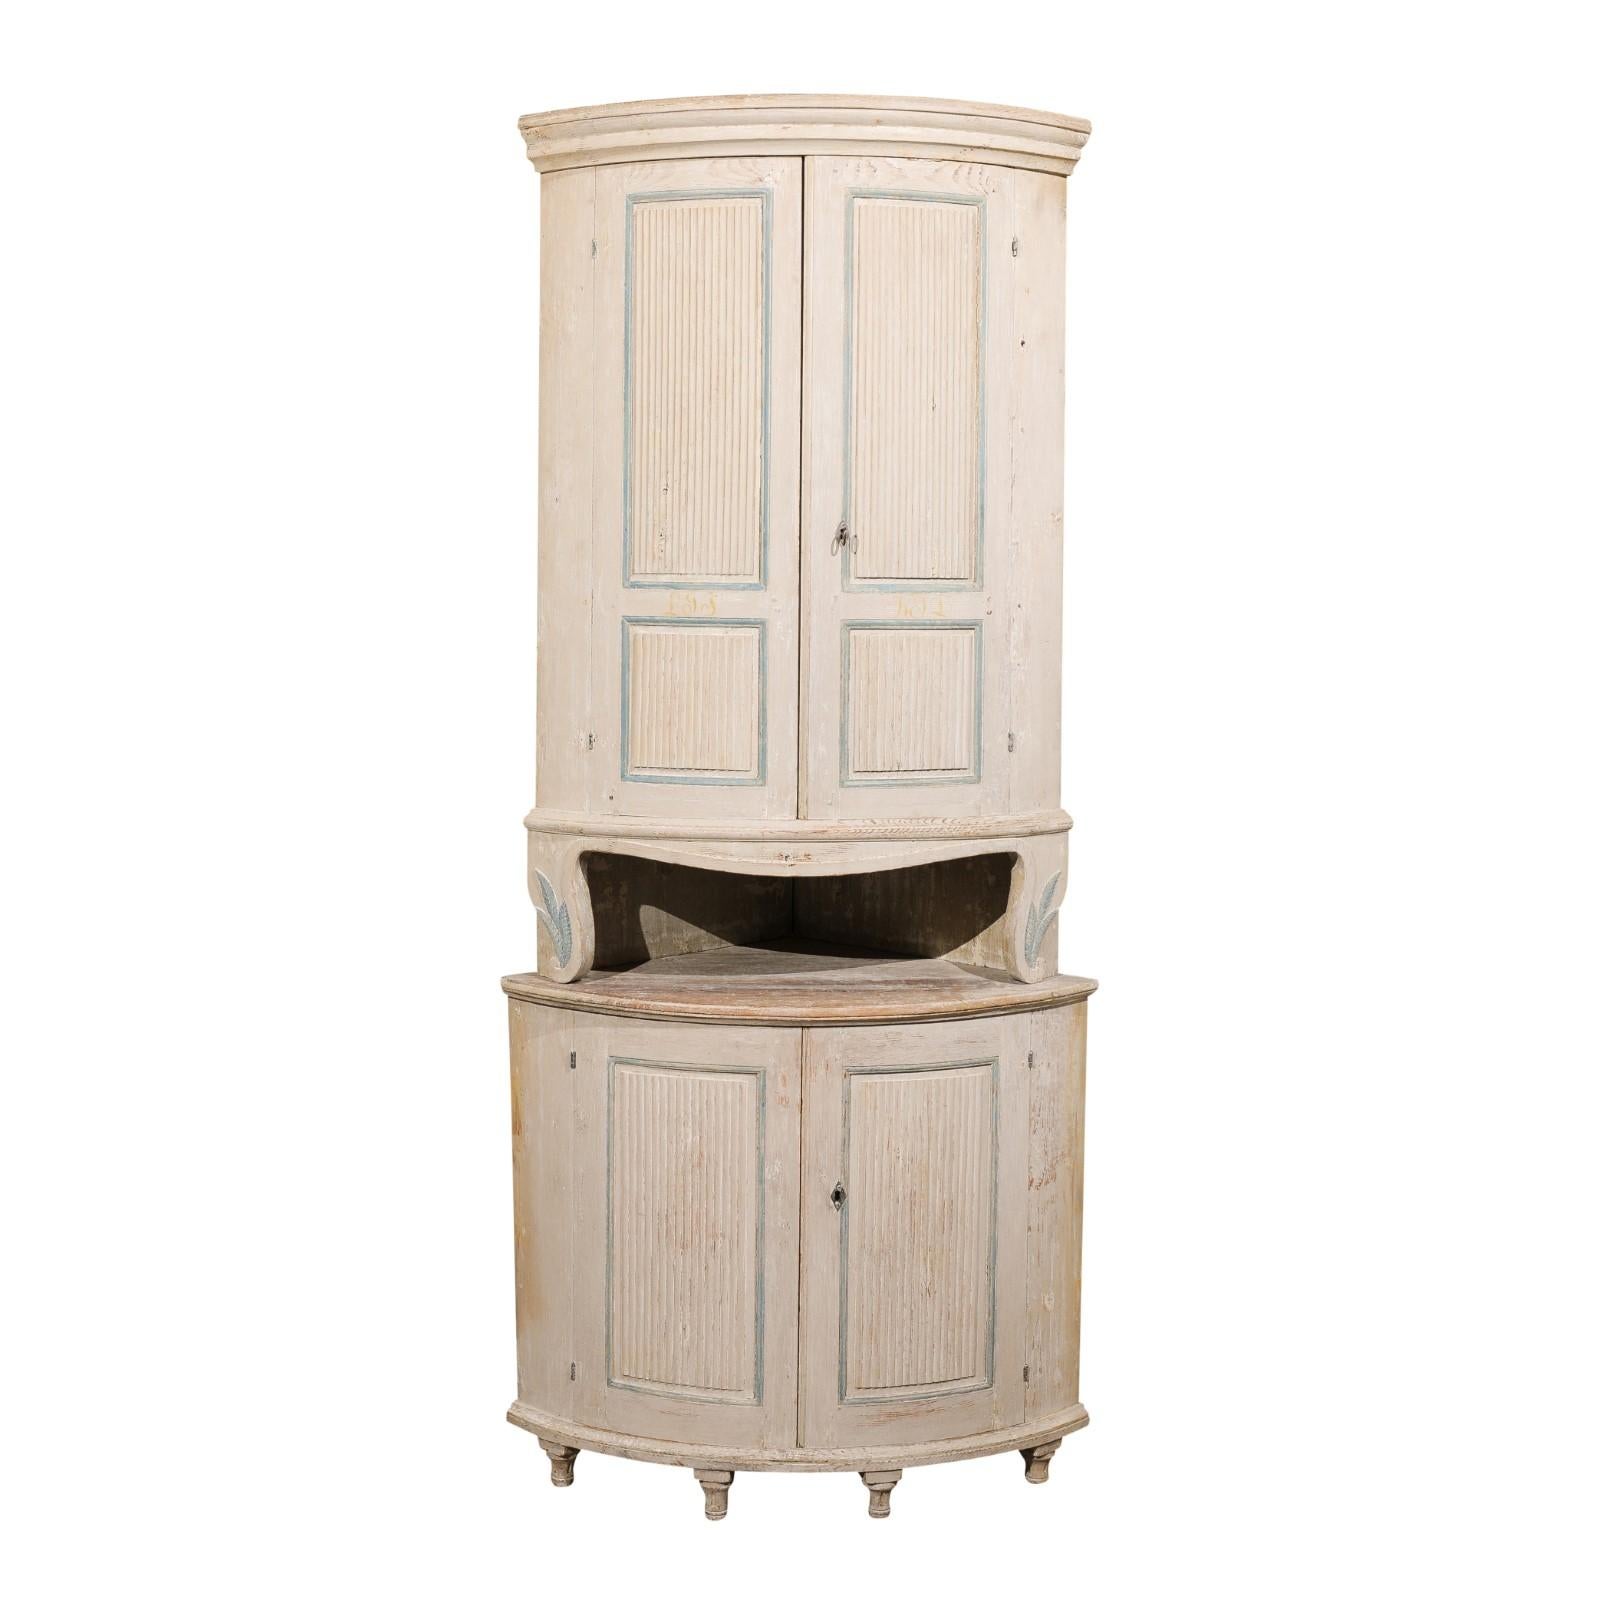 A Swedish Gustavian period painted wood two-part corner cabinet from the early 19th century, with reeded accents, foliage carving and open shelf. Created in Sweden during the Gustavian period in the early 19th century, this painted wood corner